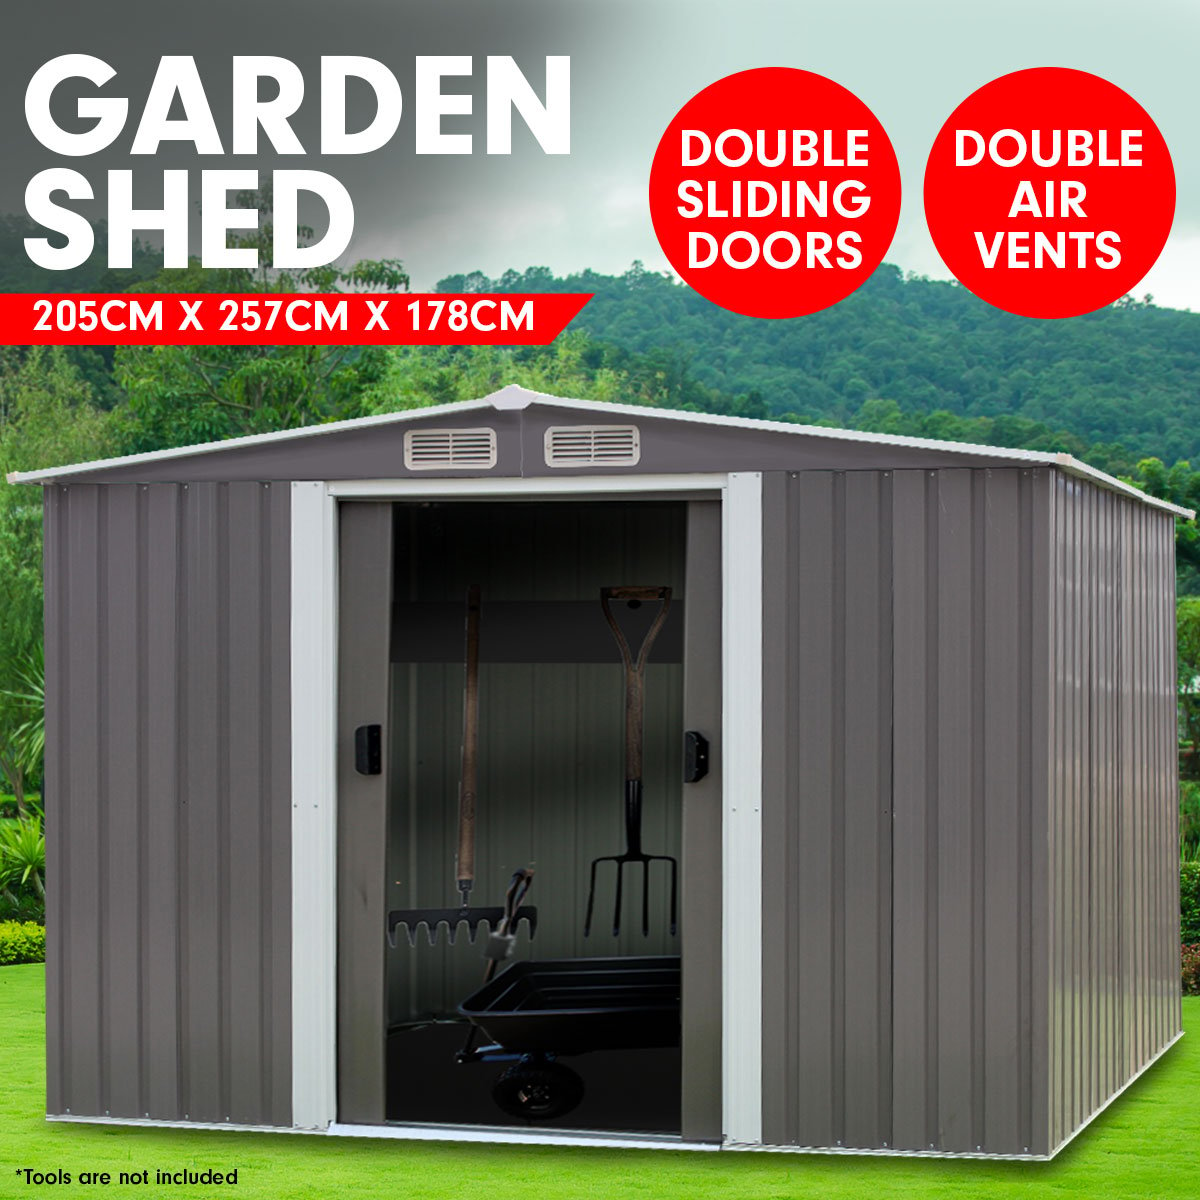 Garden Shed Spire Roof 6ft x 8ft Outdoor Storage Shelter - Grey 1